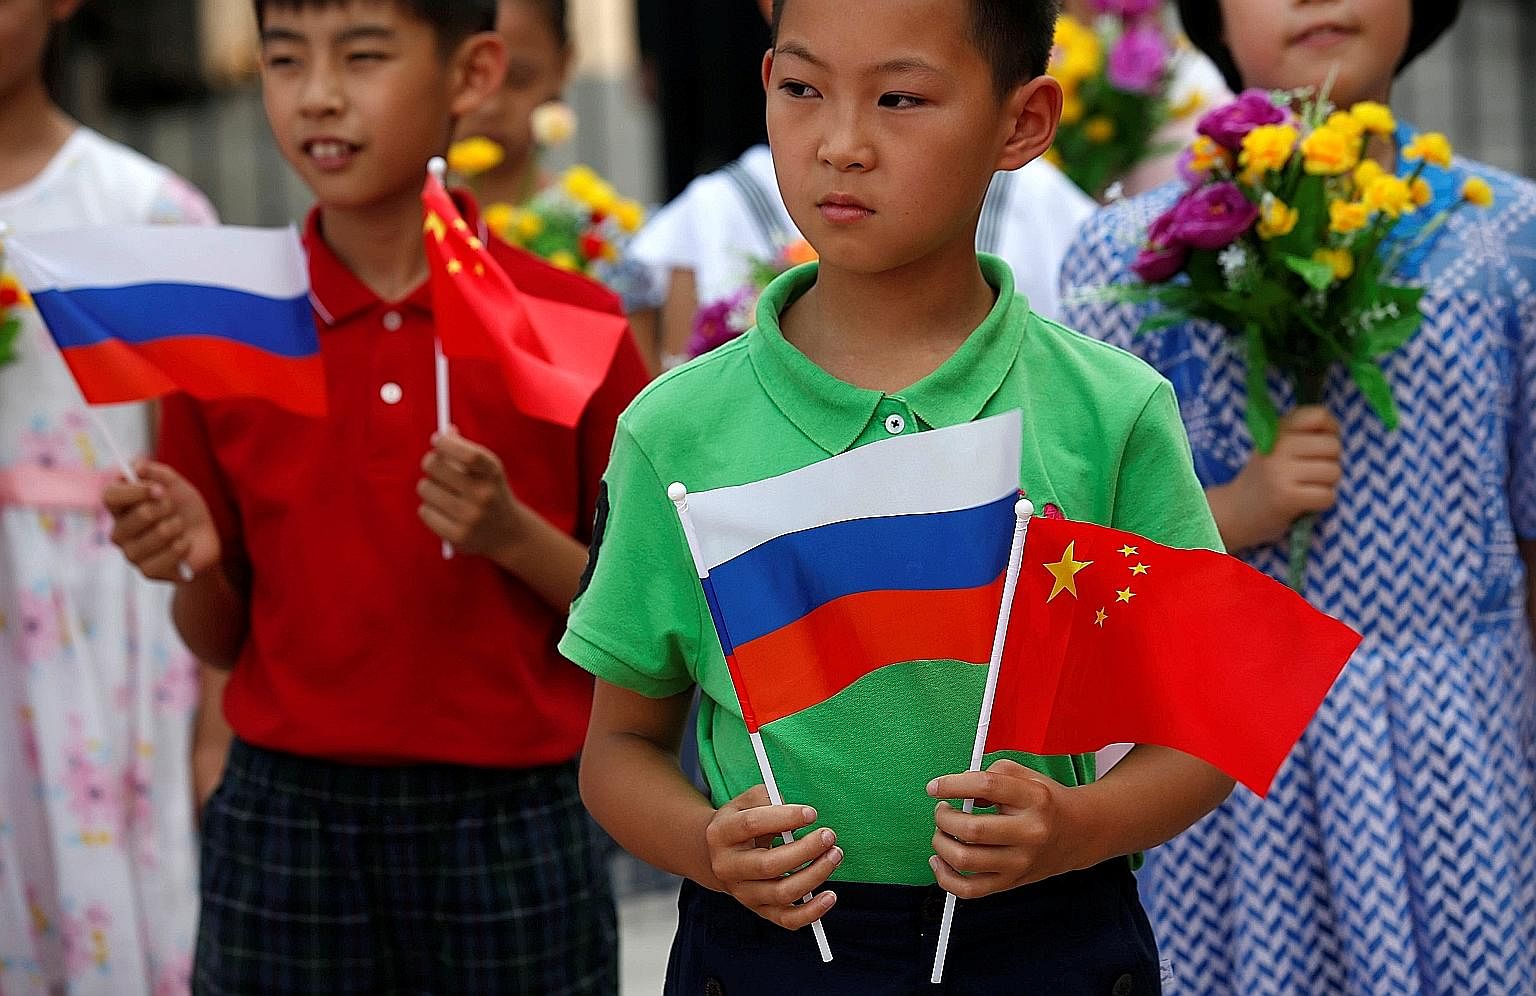 Children with Russian and Chinese flags before a welcoming ceremony for Russian President Vladimir Putin in Beijing in June. Analysts say that rather than a Cold War-style confrontation, what is happening instead is a deepening of the Sino-Russian re